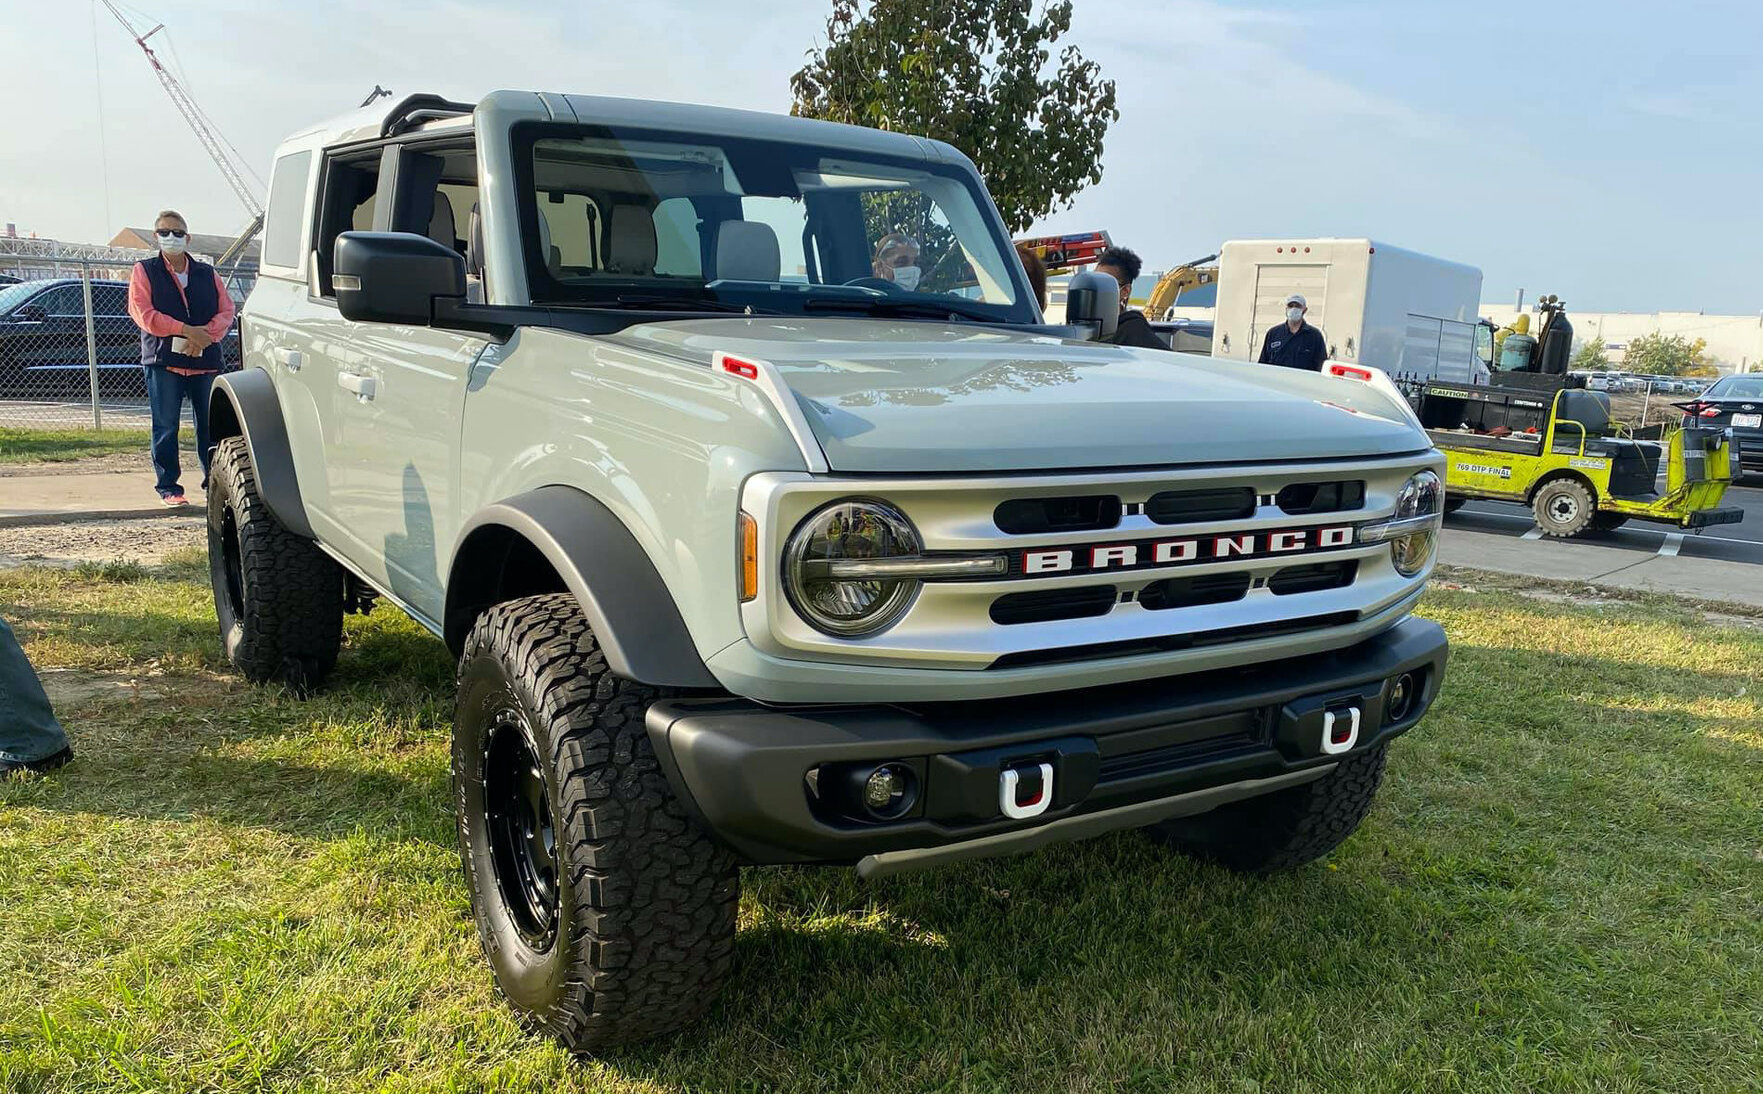 Cactus Gray Launch Bronco 4-Door at Another Employee Event | Bronco6G - 2021+ Ford Bronco